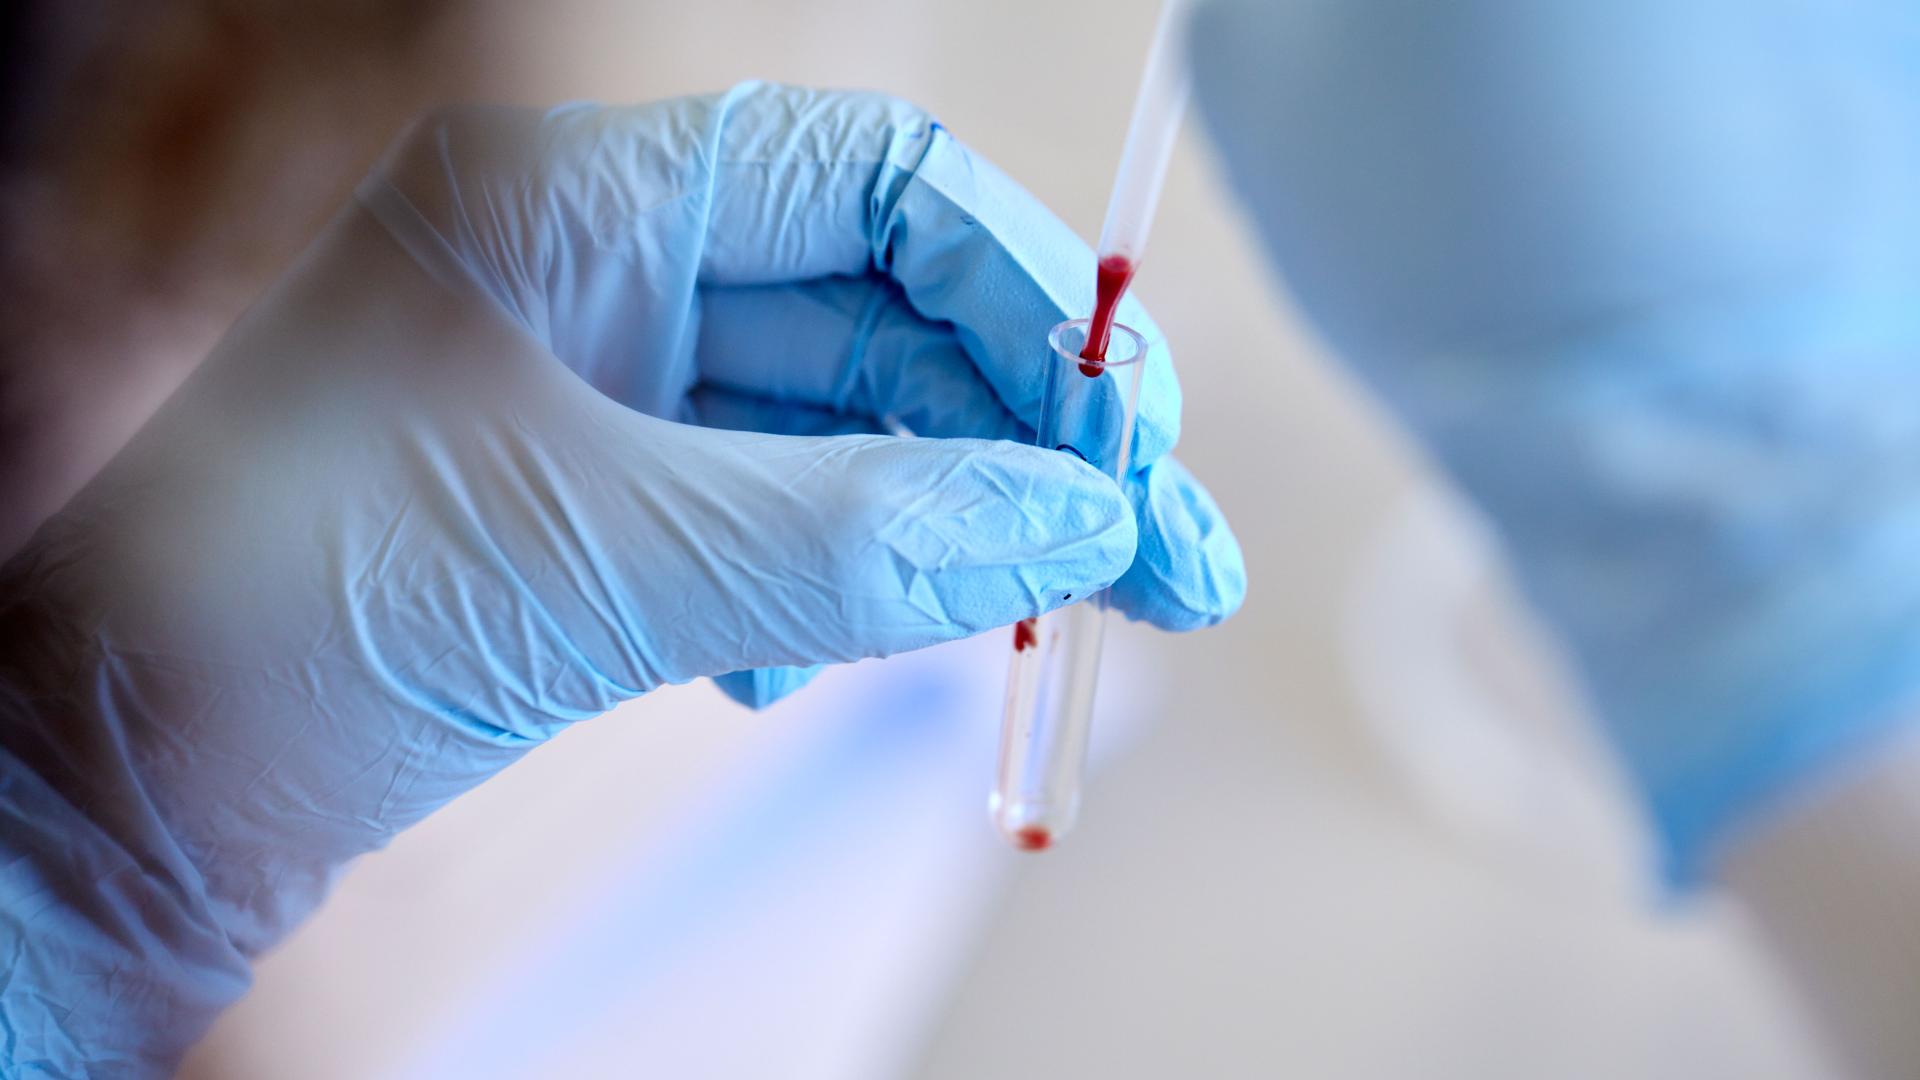 Student working with blood sample in a lab